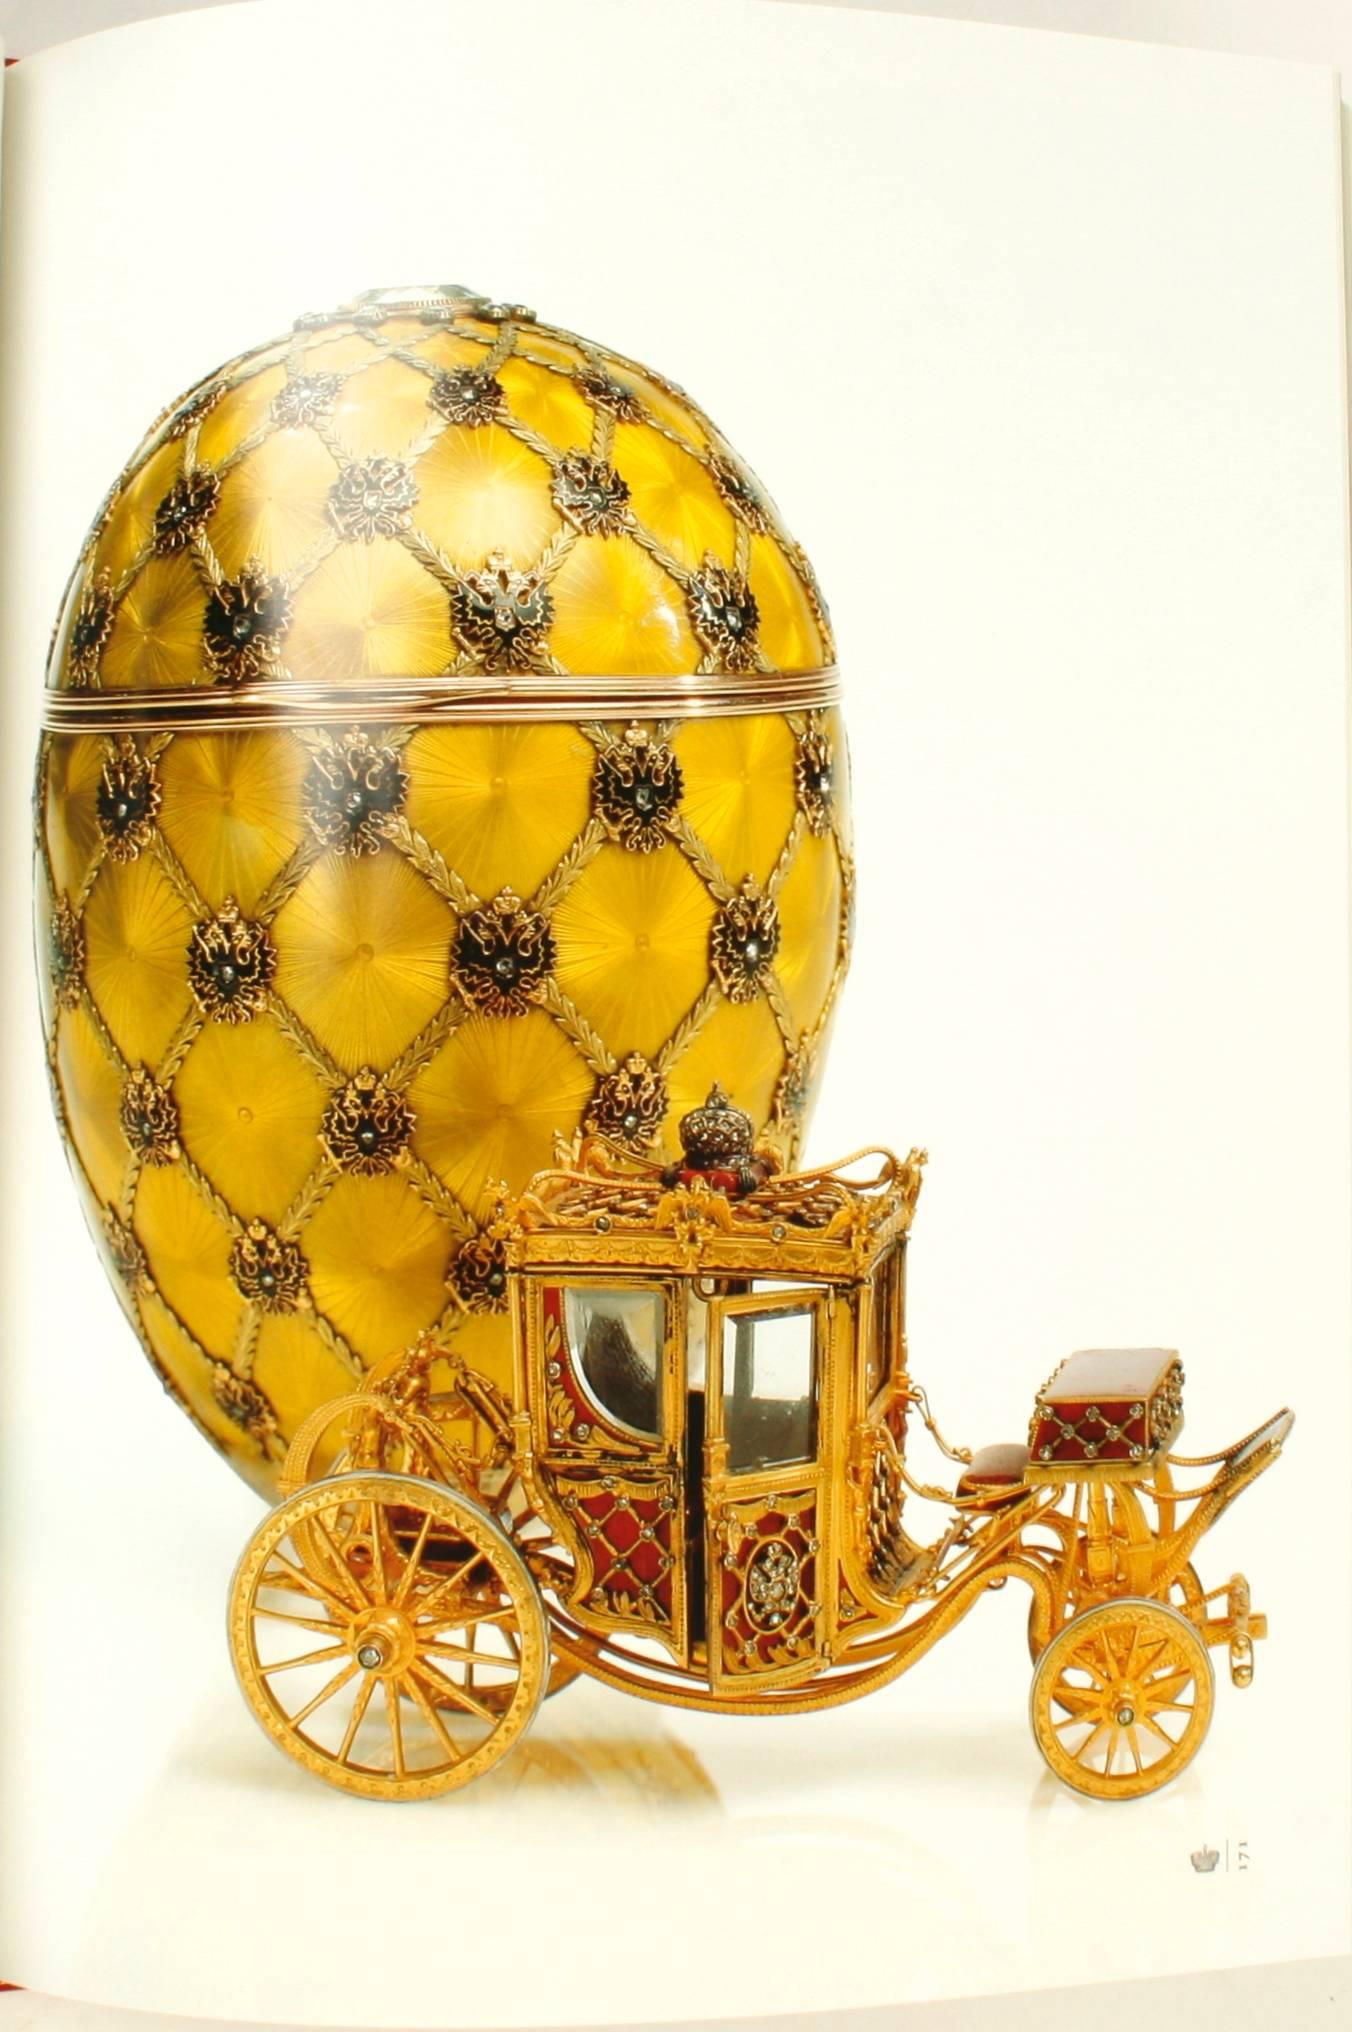 Contemporary Fabergé: Treasures of Imperial Russia by Géza Von Habsburg, 1st Ed